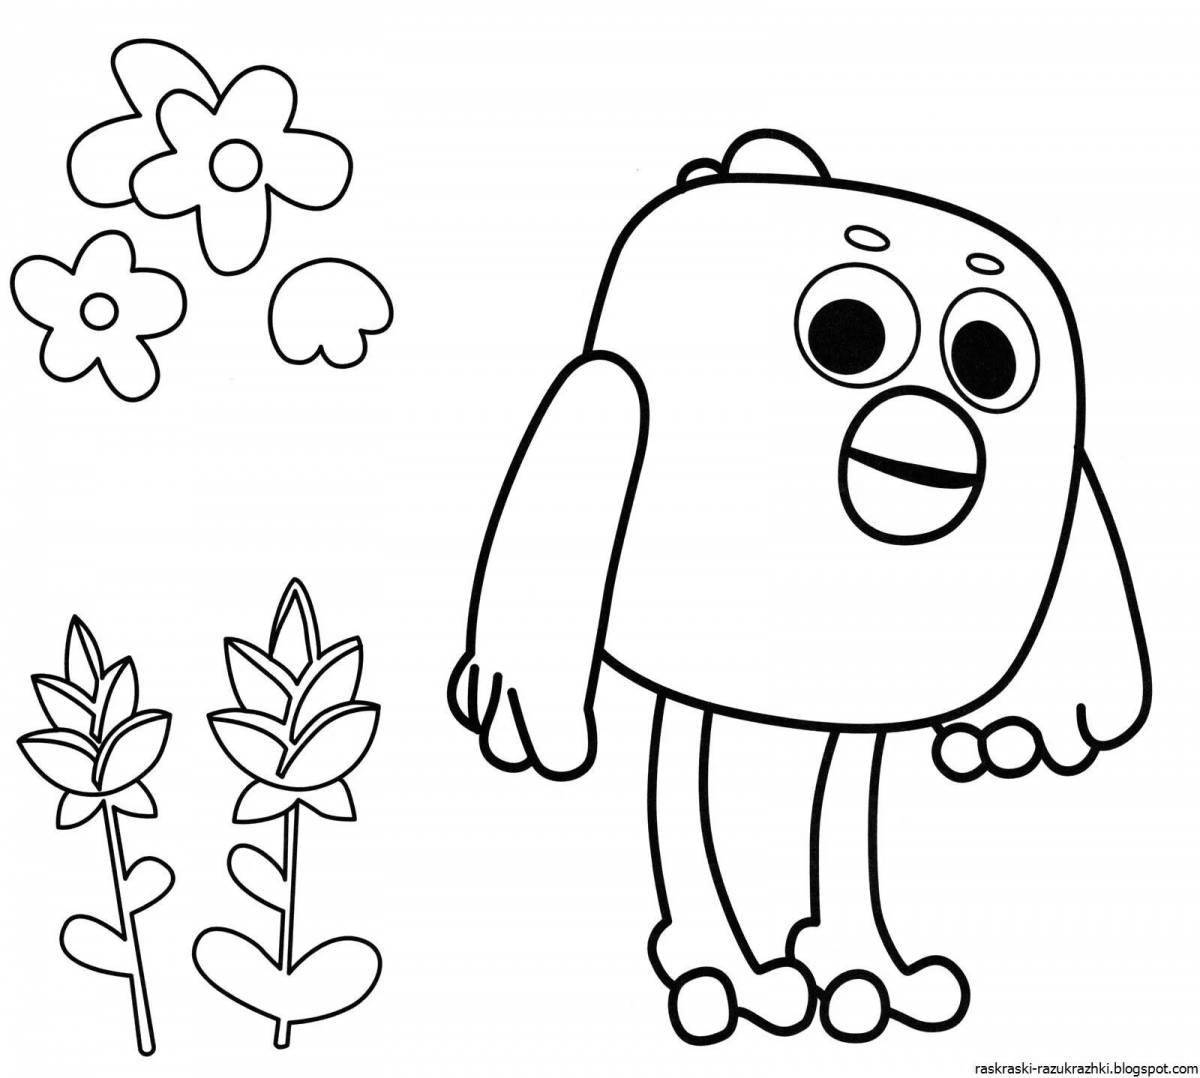 Fun coloring for the little ones